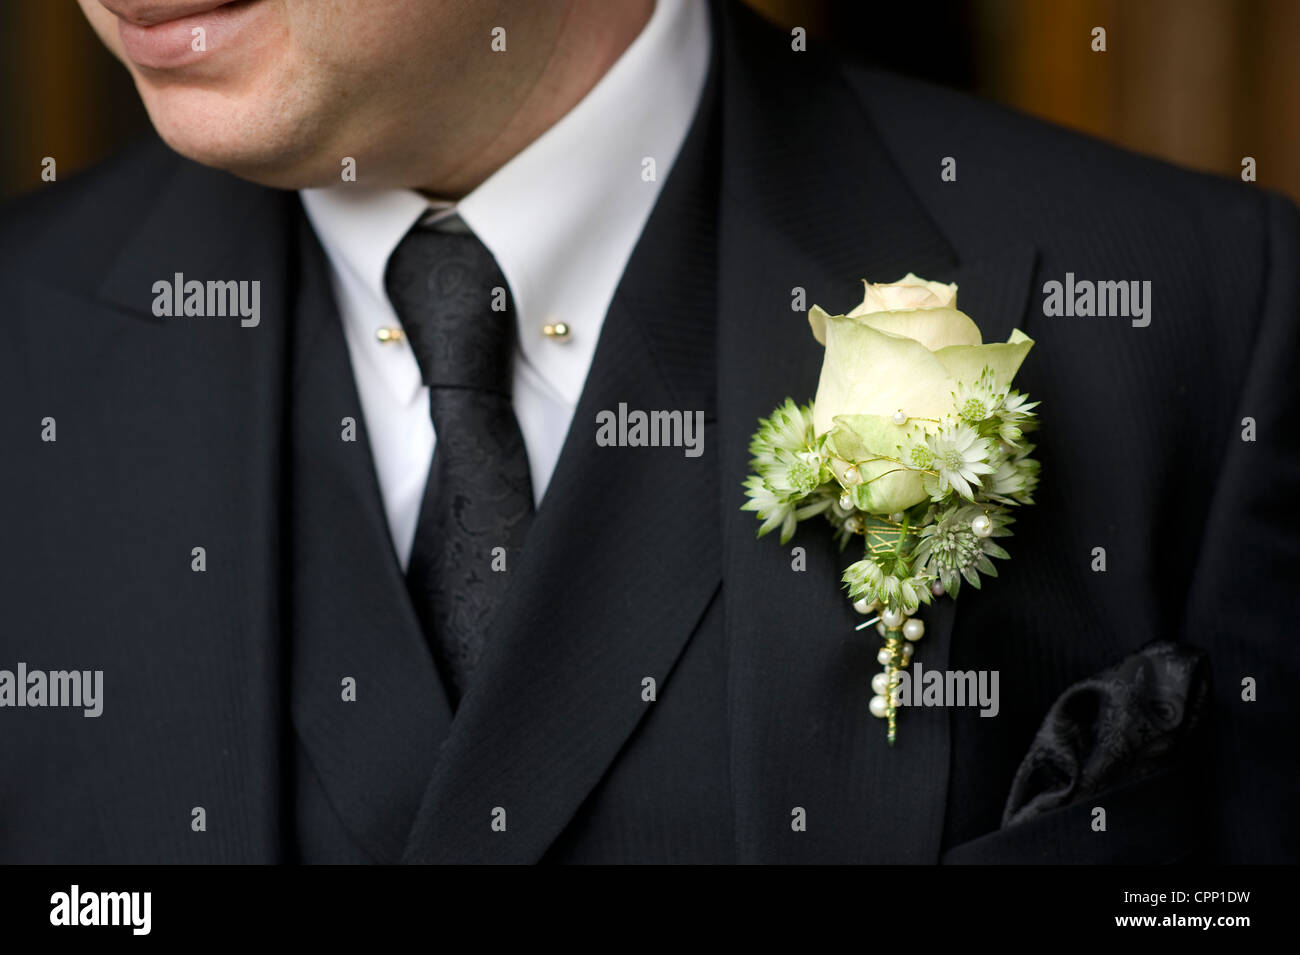 man at a wedding or funeral wearing black suit with rose buttonhole Stock Photo